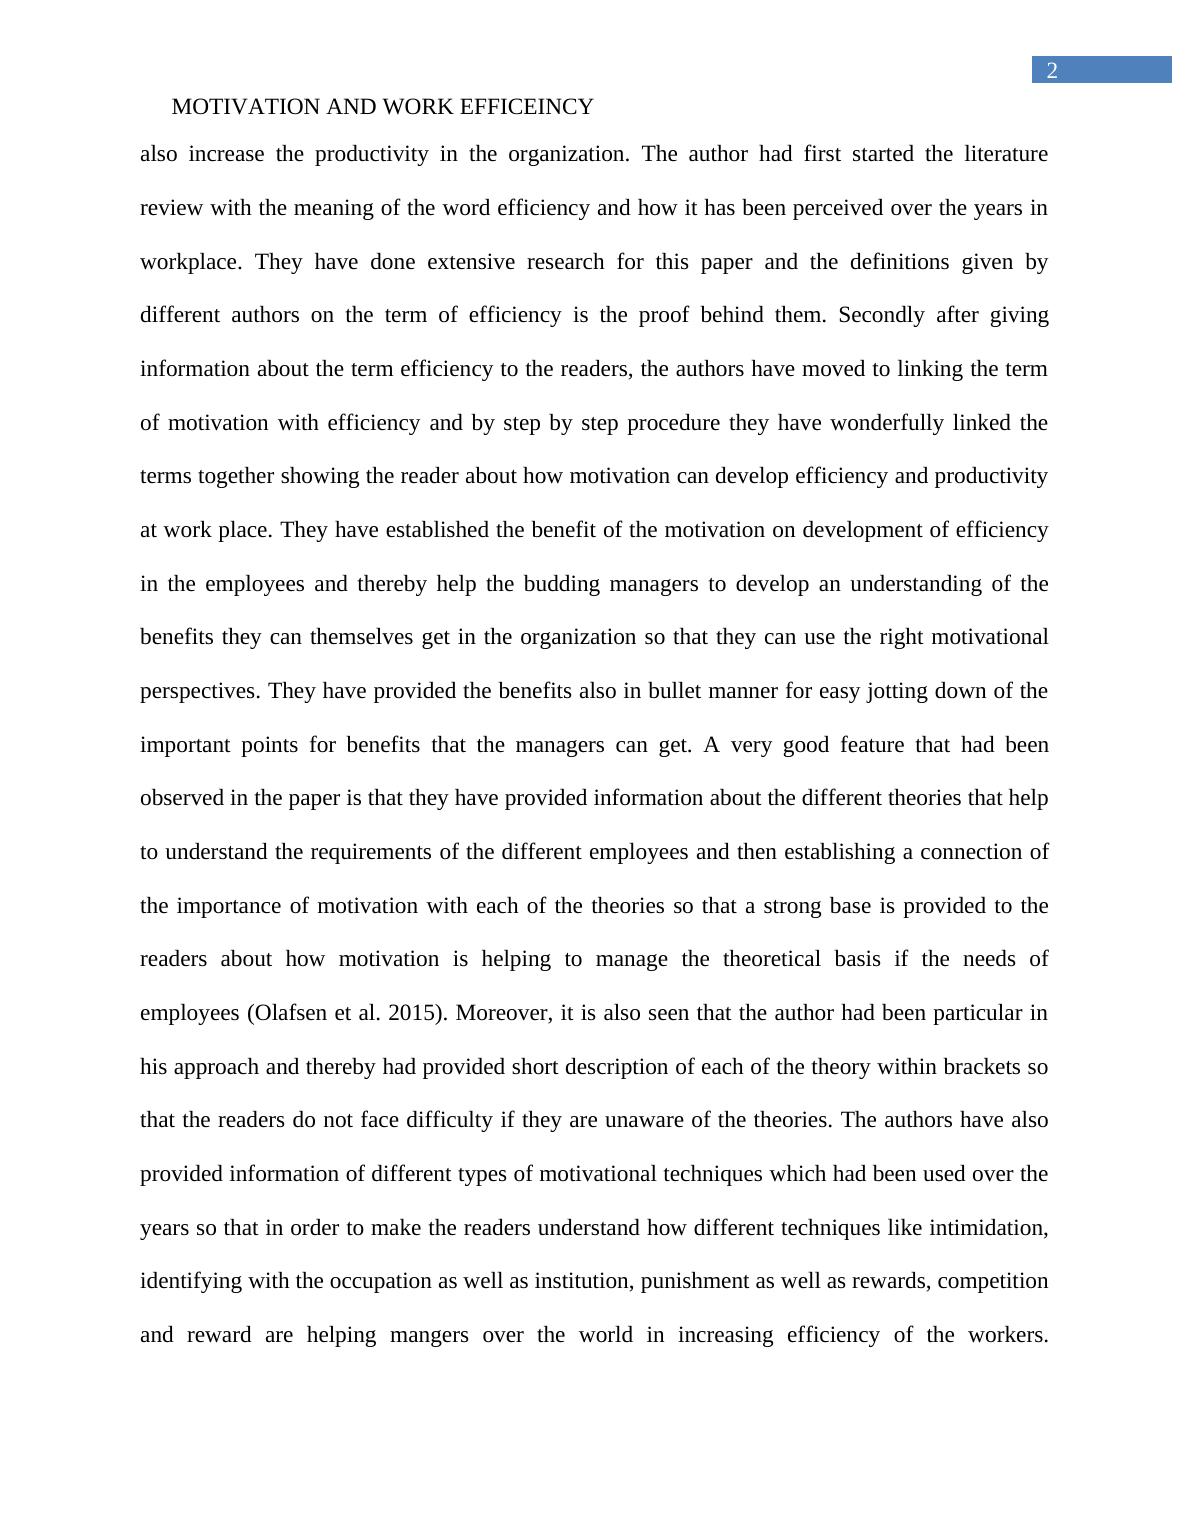 Essay on Motivation and Work Efficiency_3